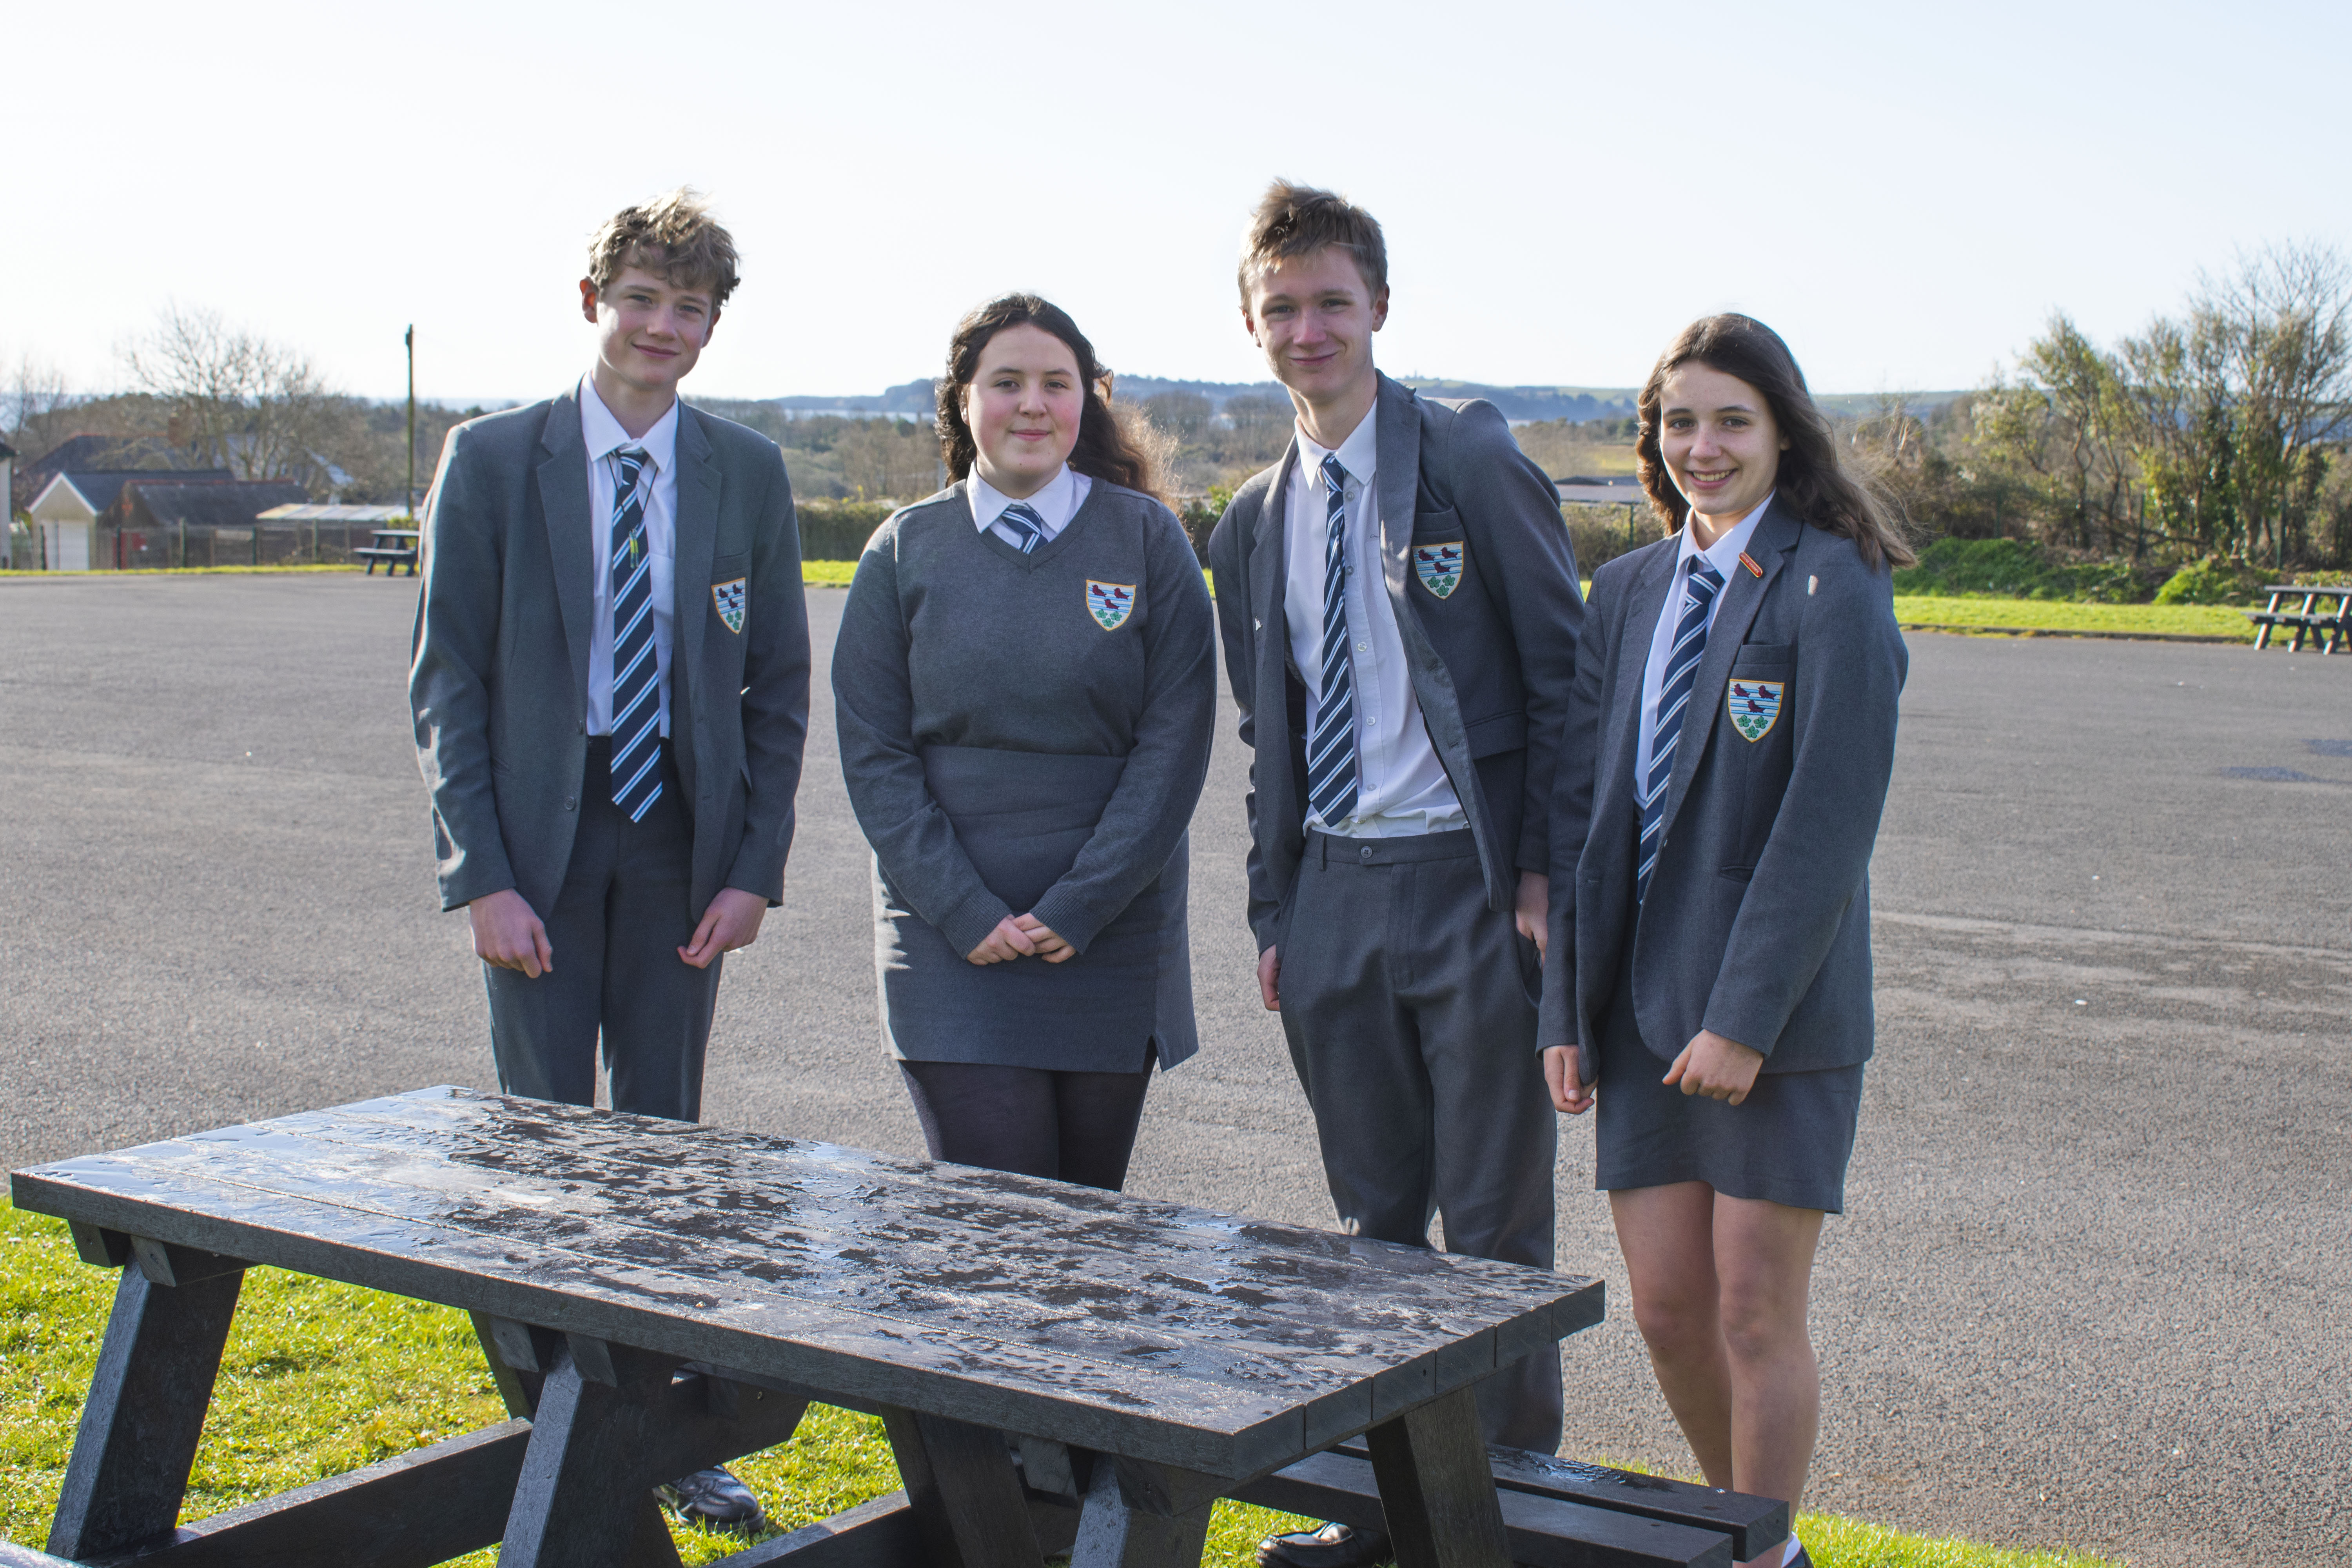 Greenhill pupils 'on the bench' | tenby-today.co.uk